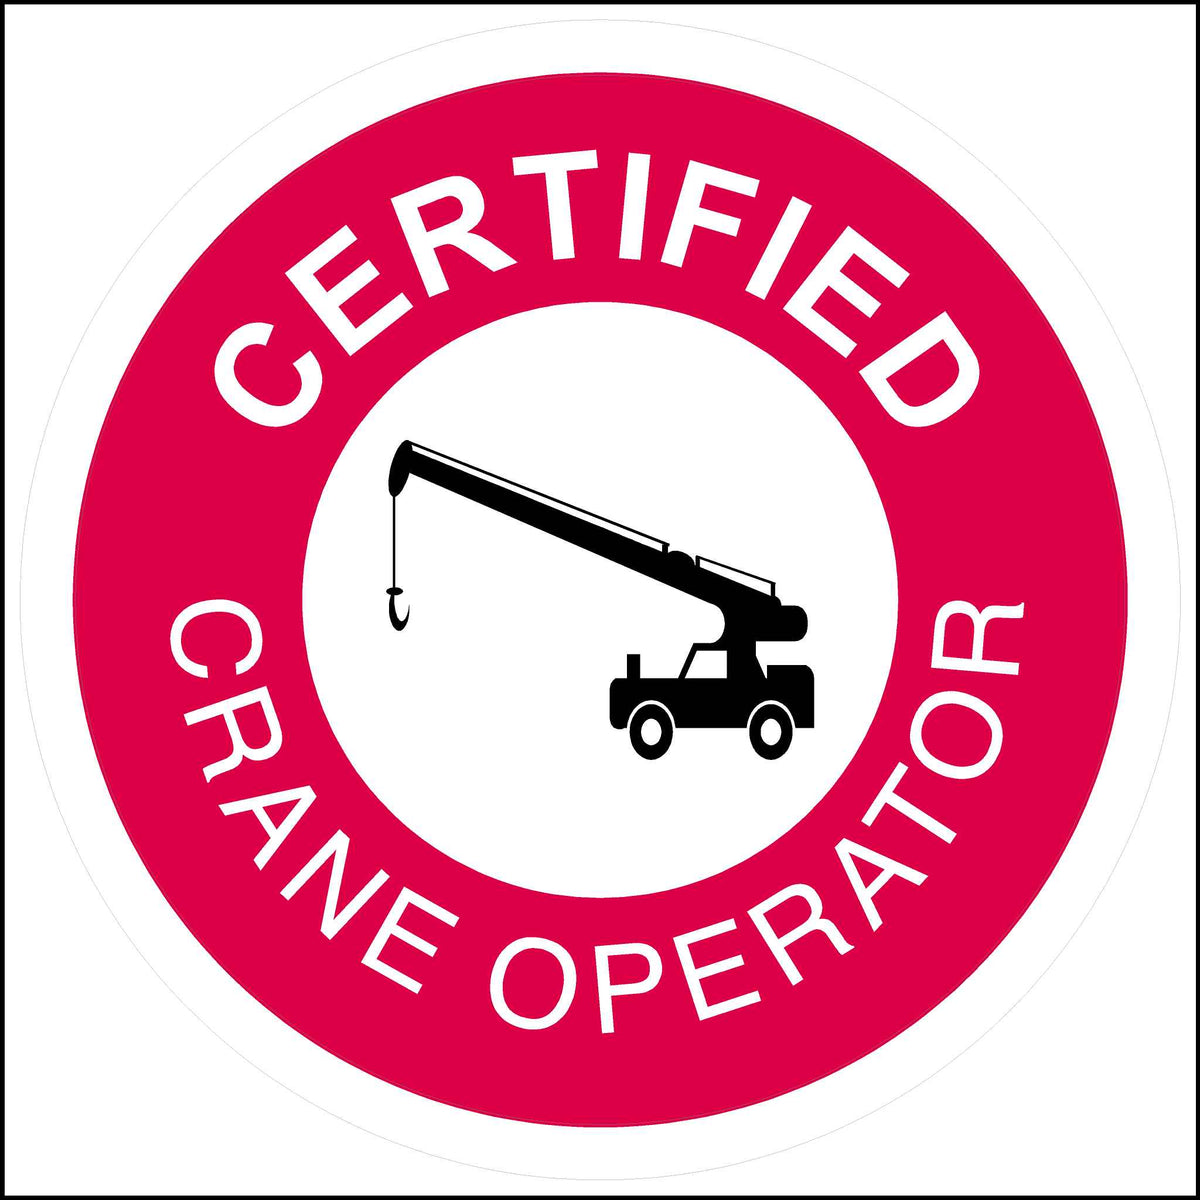 2 inch round red sticker printed with white letters saying certified crane operator, with a picture of a truck crane in black.